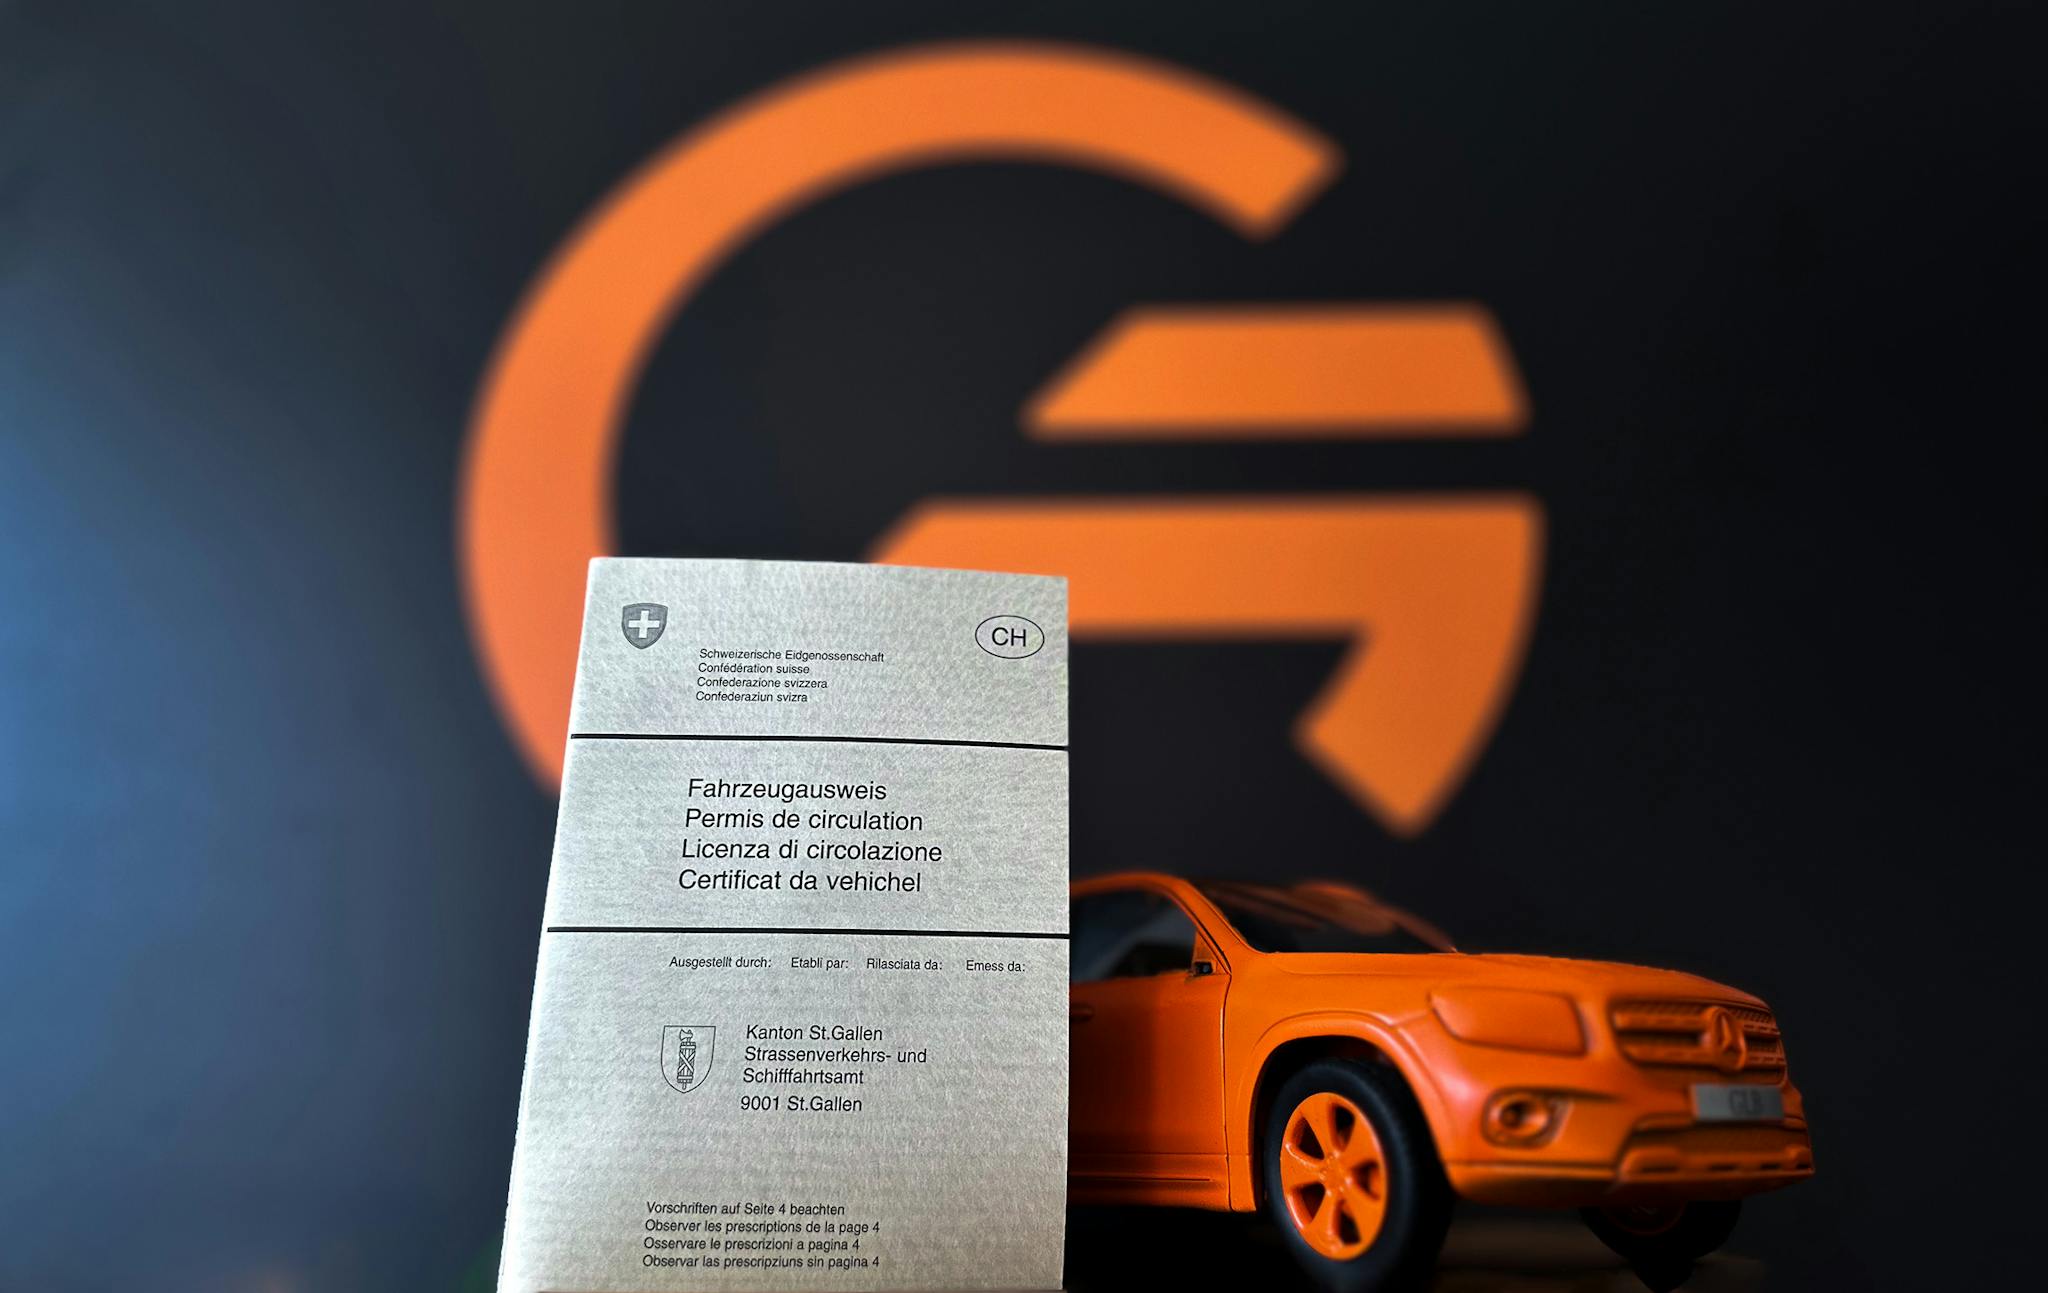 blog item card - Find out how to register your newly leased car in Switzerland! From getting proof of insurance, the formalities, to getting the registration document - Gowago helps you along the way!